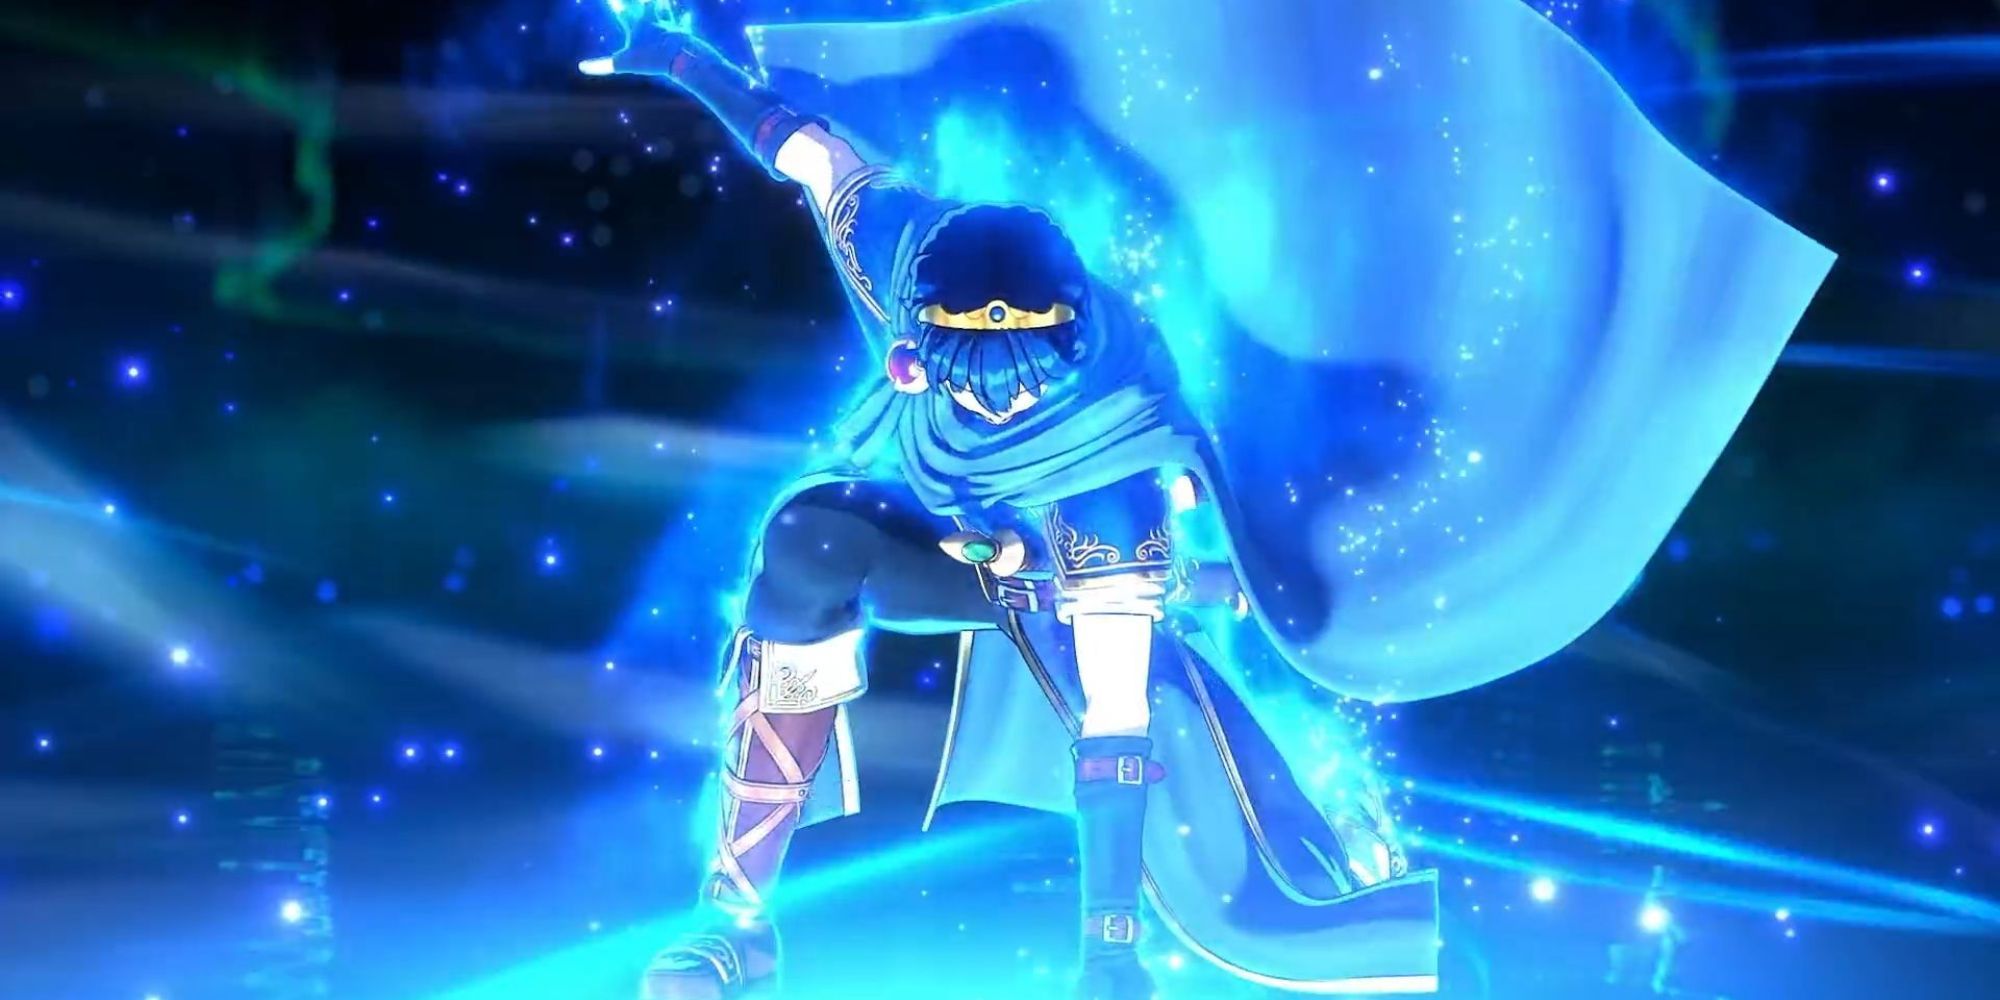 Fire Emblem Engage Marth being summoned from the ring